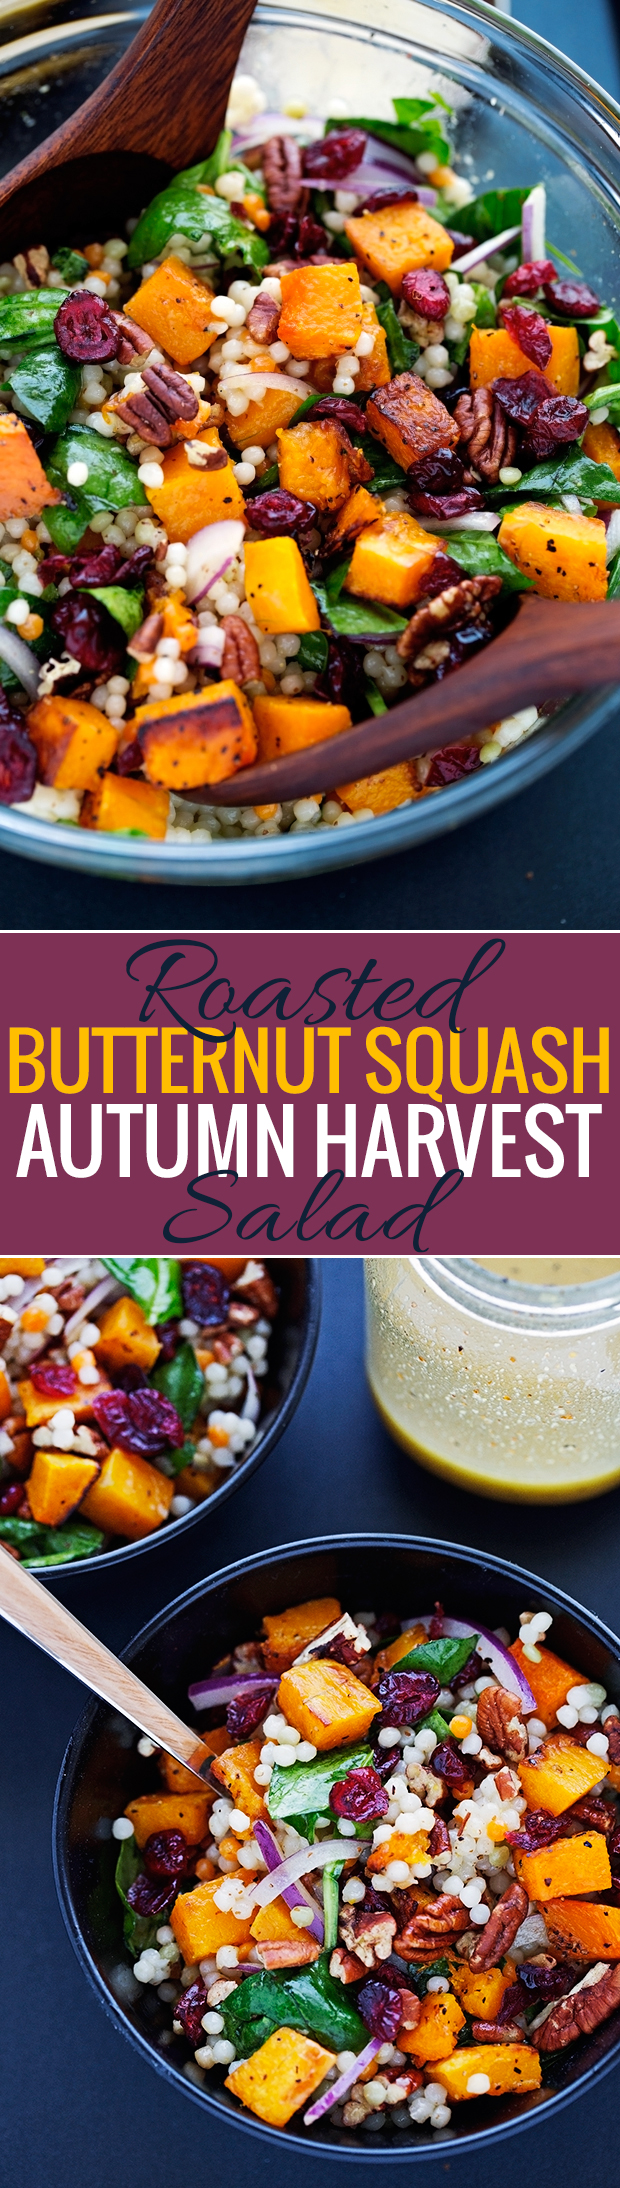 Autumn Pearl Couscous Salad with Roasted Butternut Squash - tossed in a light dijon vinaigrette. This salad is hearty and filling! #roastedbutternutsquash #autumnsalad #harvestsalad | Littlespicejar.com